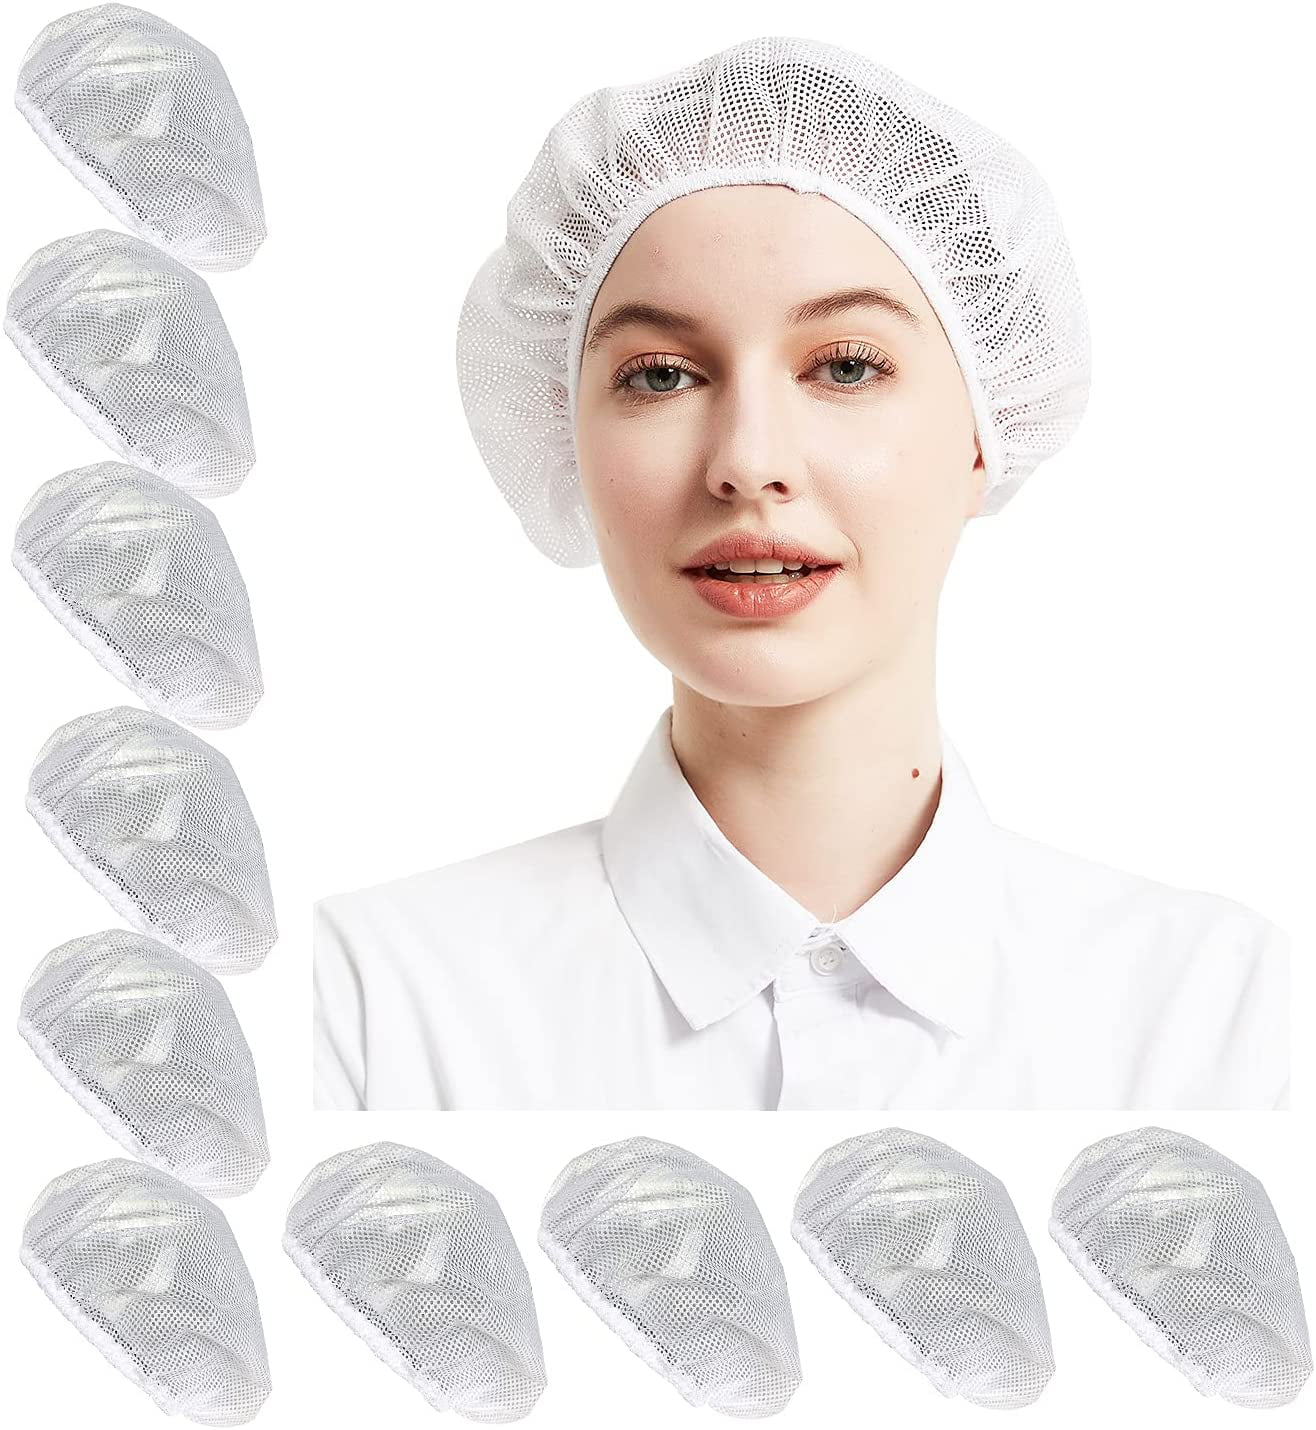 20 X CHEF HOSPITALITY FOOD INDUSTRY PREPARATION FITTED HAIR MESH NET HAT 